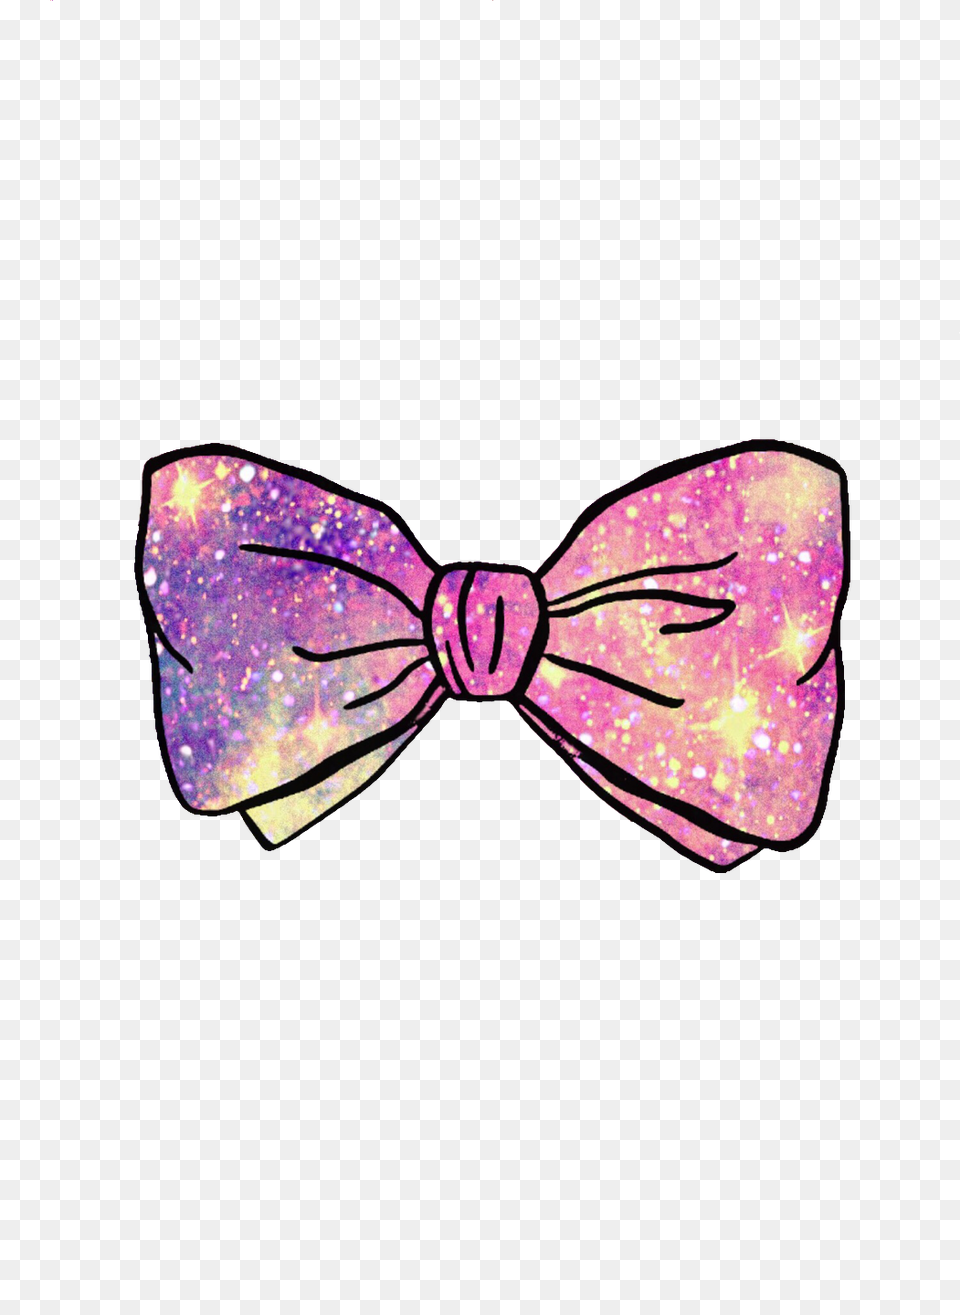 Stylish Stickers Pretty Drawings, Accessories, Formal Wear, Tie, Bow Tie Png Image